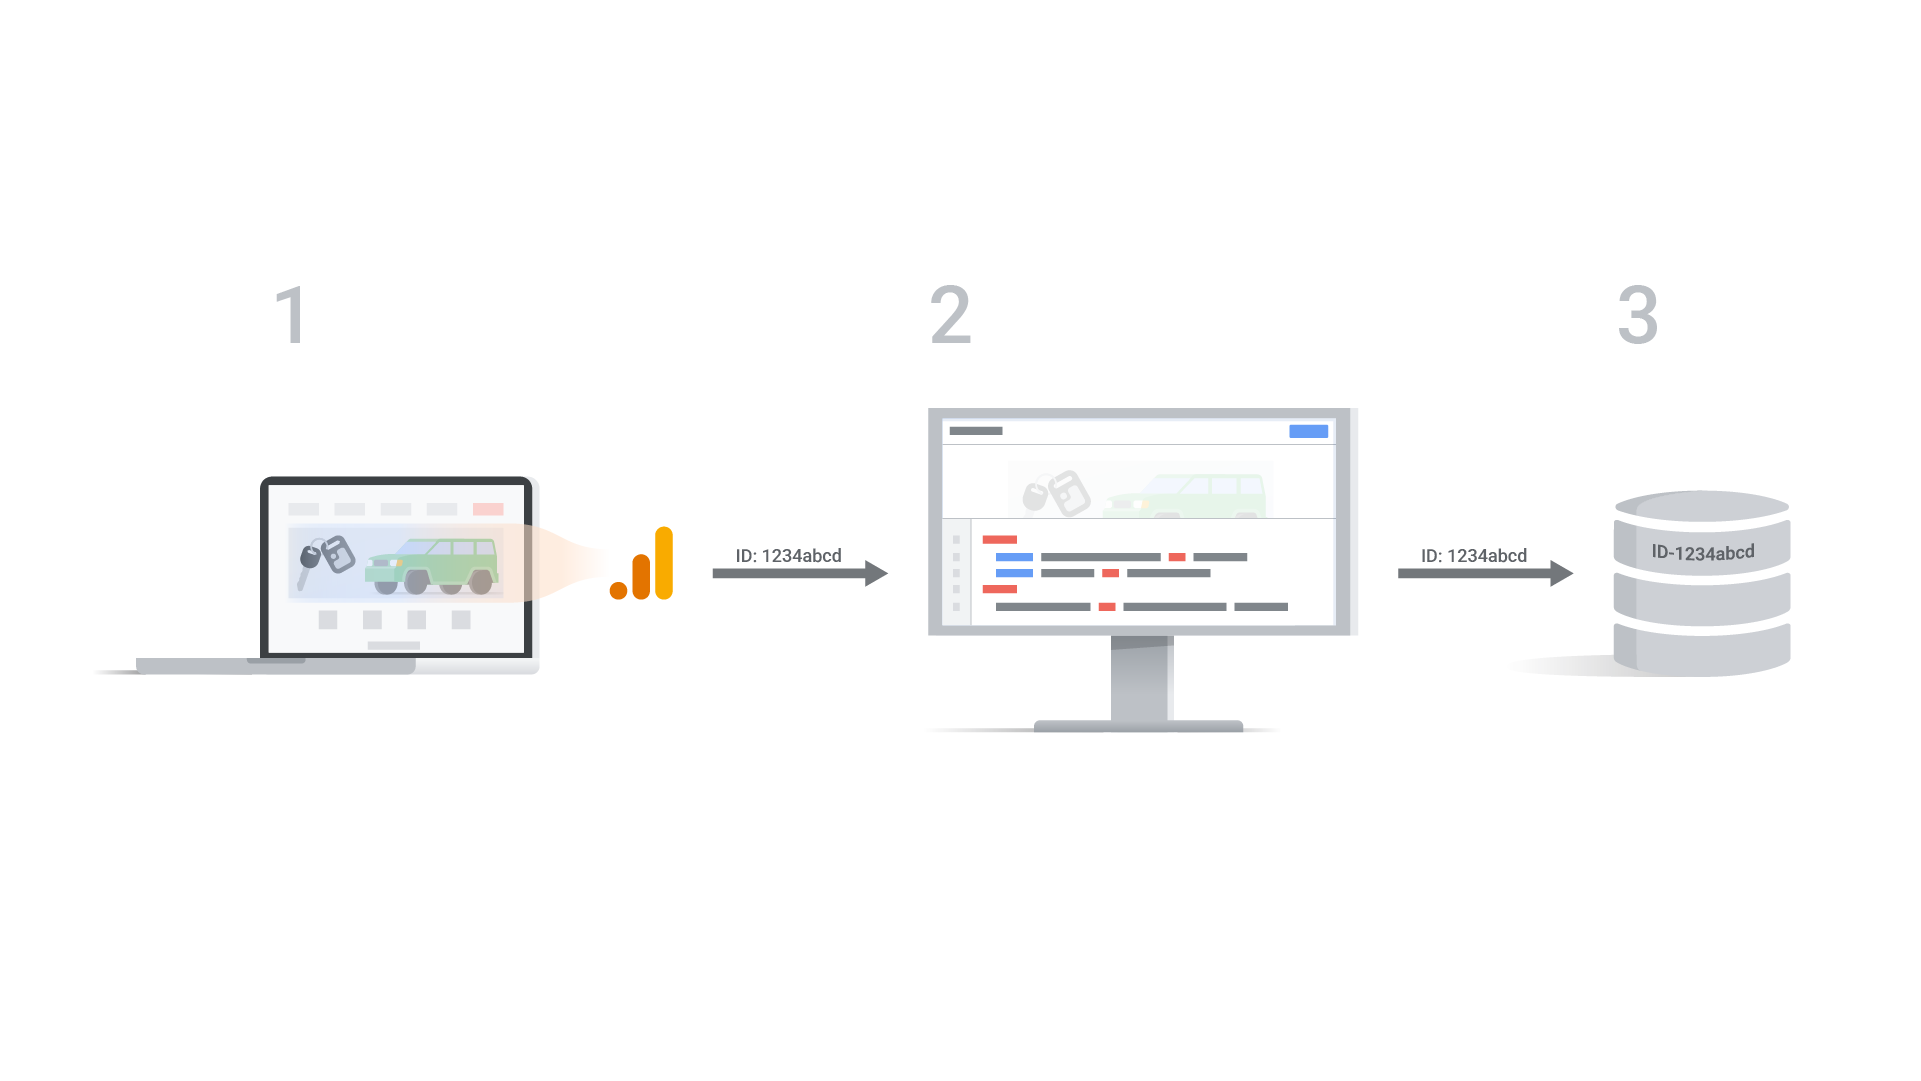 Graphic representing:  1. A user submits a booking to test drive a new car model. The website sends the Google Analytics client ID in the _ga cookie. Google Analytics associates the client ID with the traffic source that generated the session.  2. The car dealership